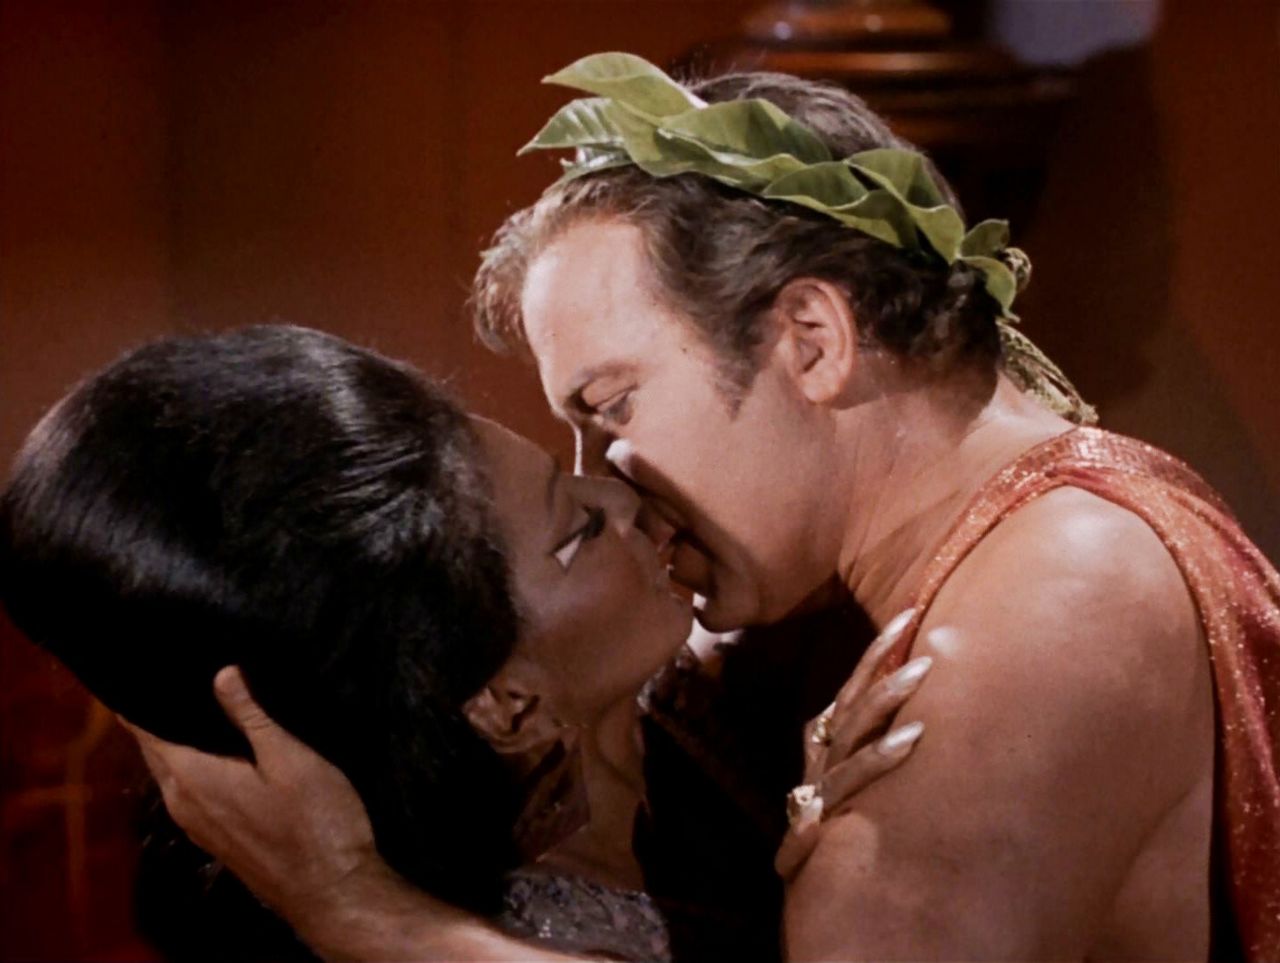 Shatner kisses Nichelle Nichols during the "Star Trek" episode "Plato's Stepchildren" in 1968. It is often credited as<a href="https://www.cnn.com/2015/11/20/world/first-interracial-kiss-on-tv/index.html" target="_blank"> the first interracial kiss on American television.</a>